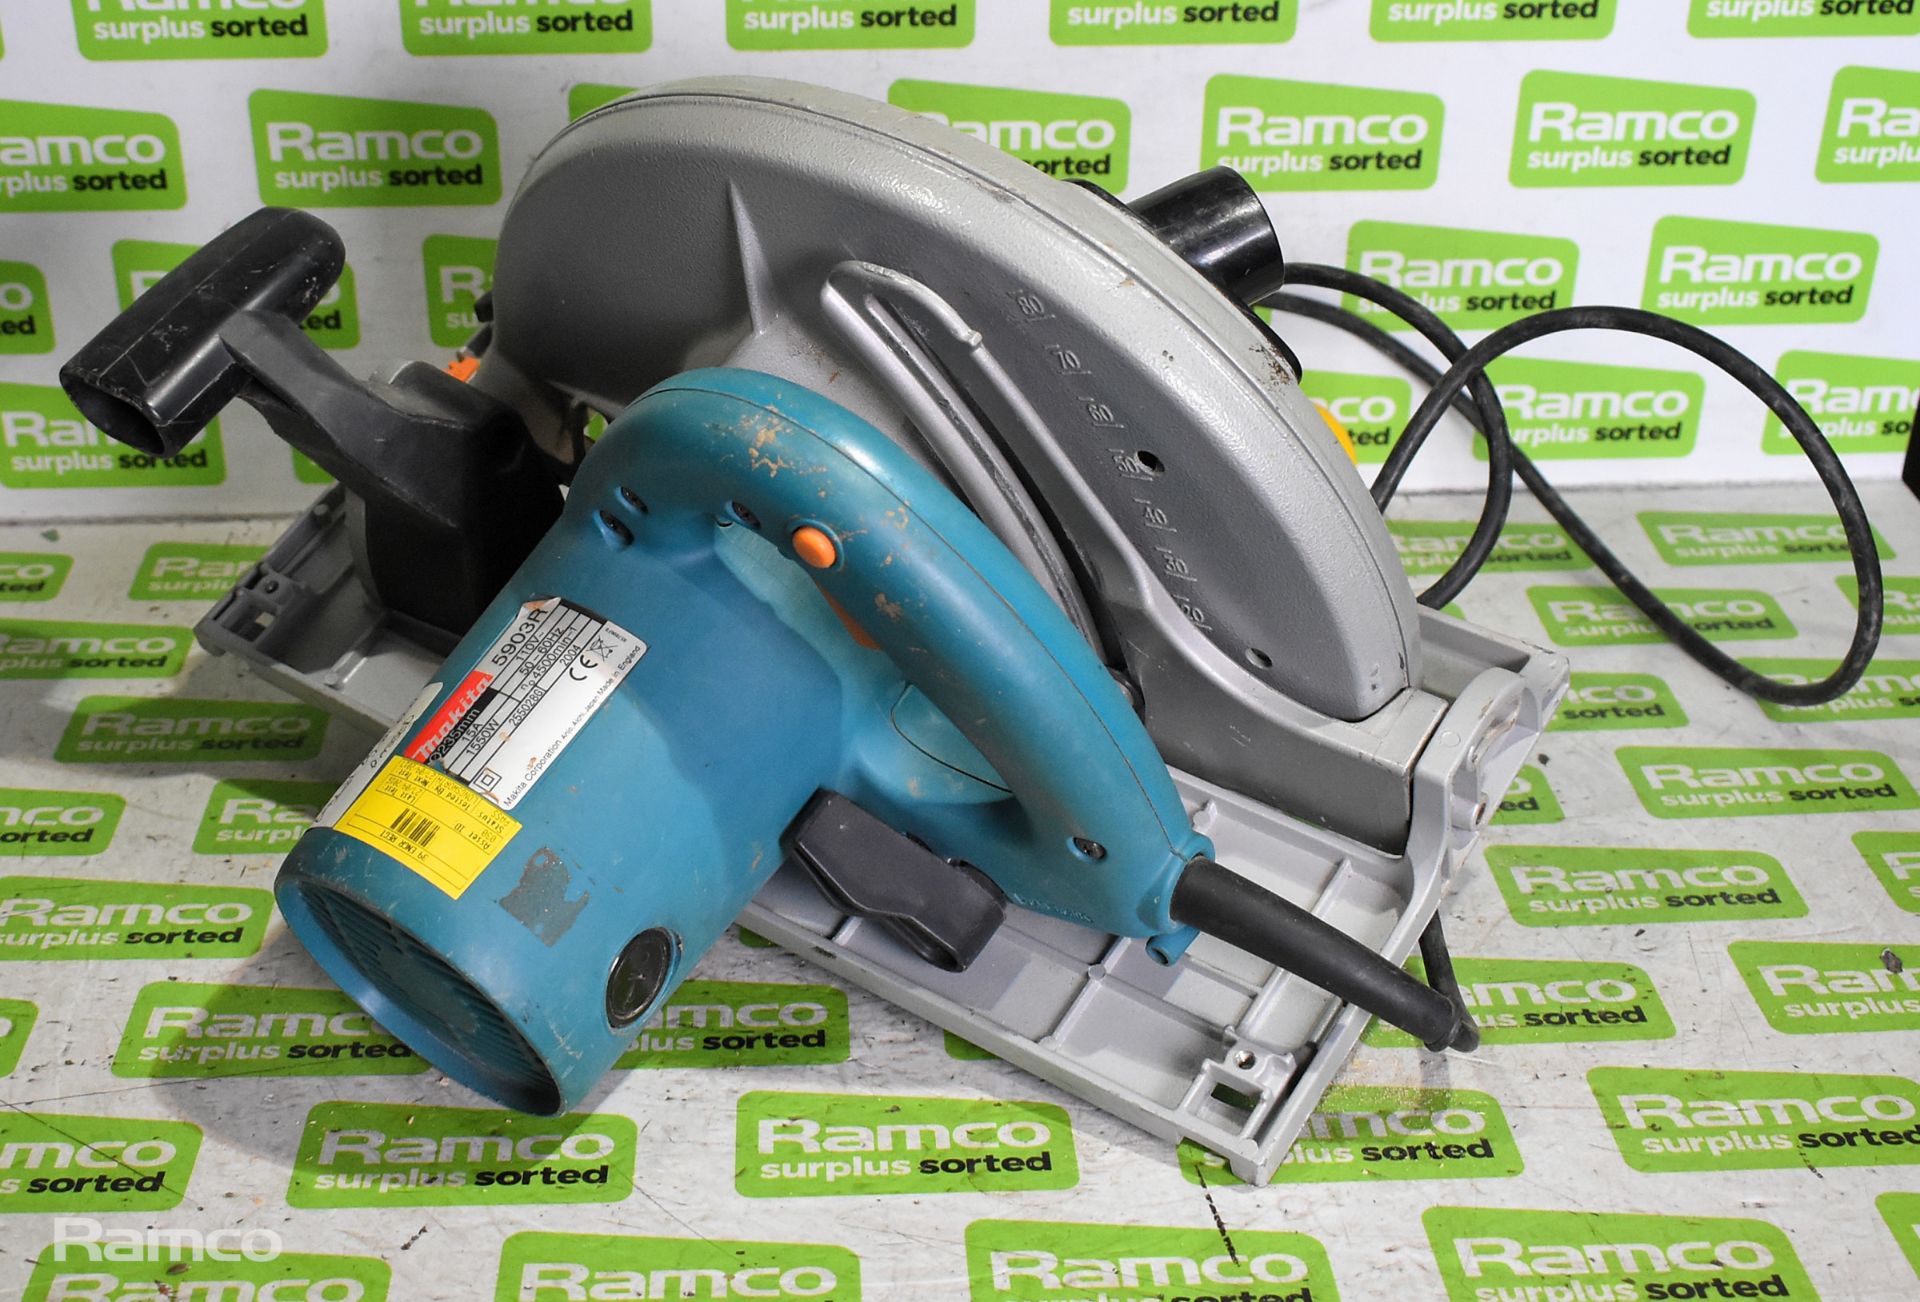 Makita 5903R 110V circular saw 1550W - 235mm blade with case - Image 5 of 10